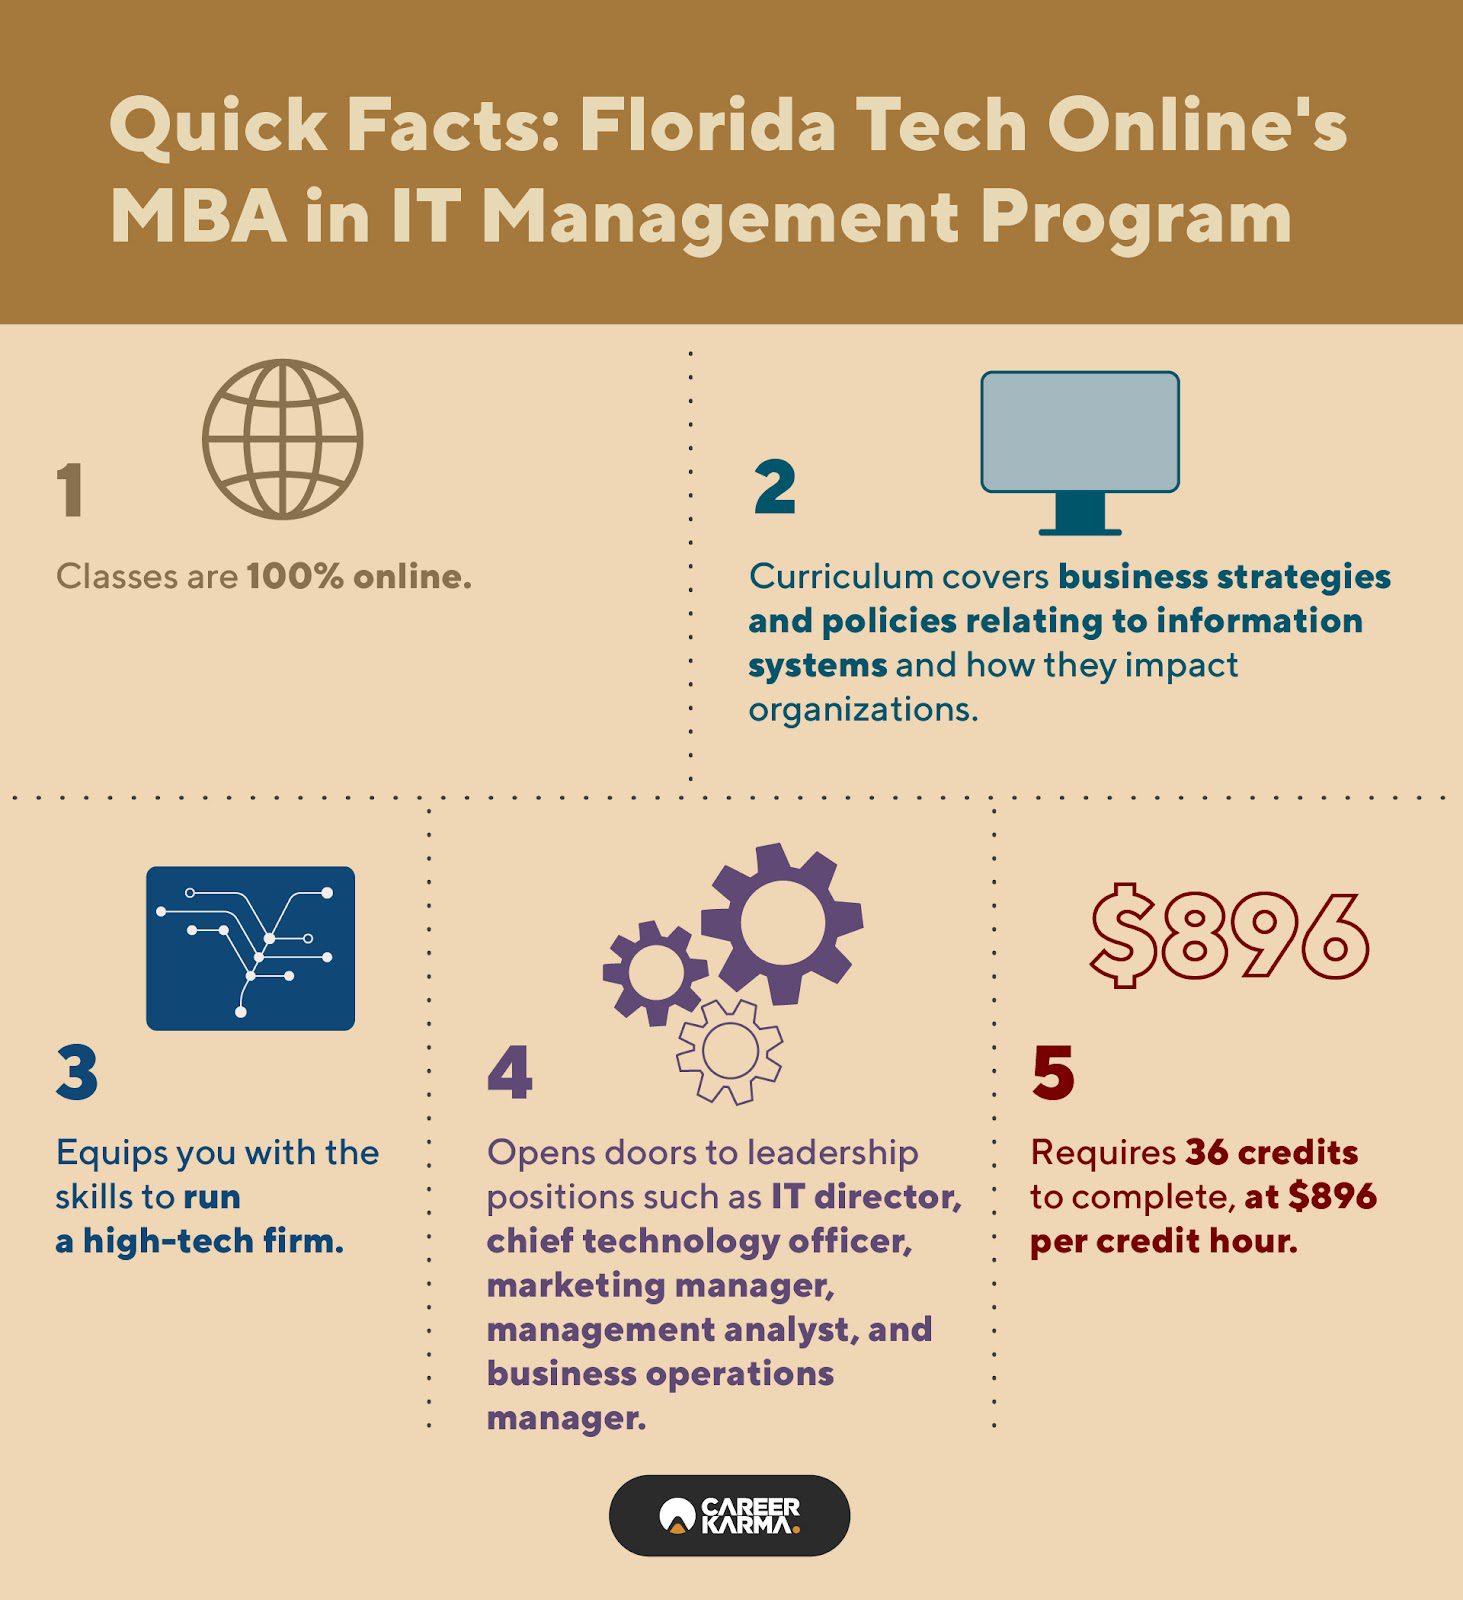 An infographic highlighting key features of Florida Online Tech’s MBA in IT Management Program